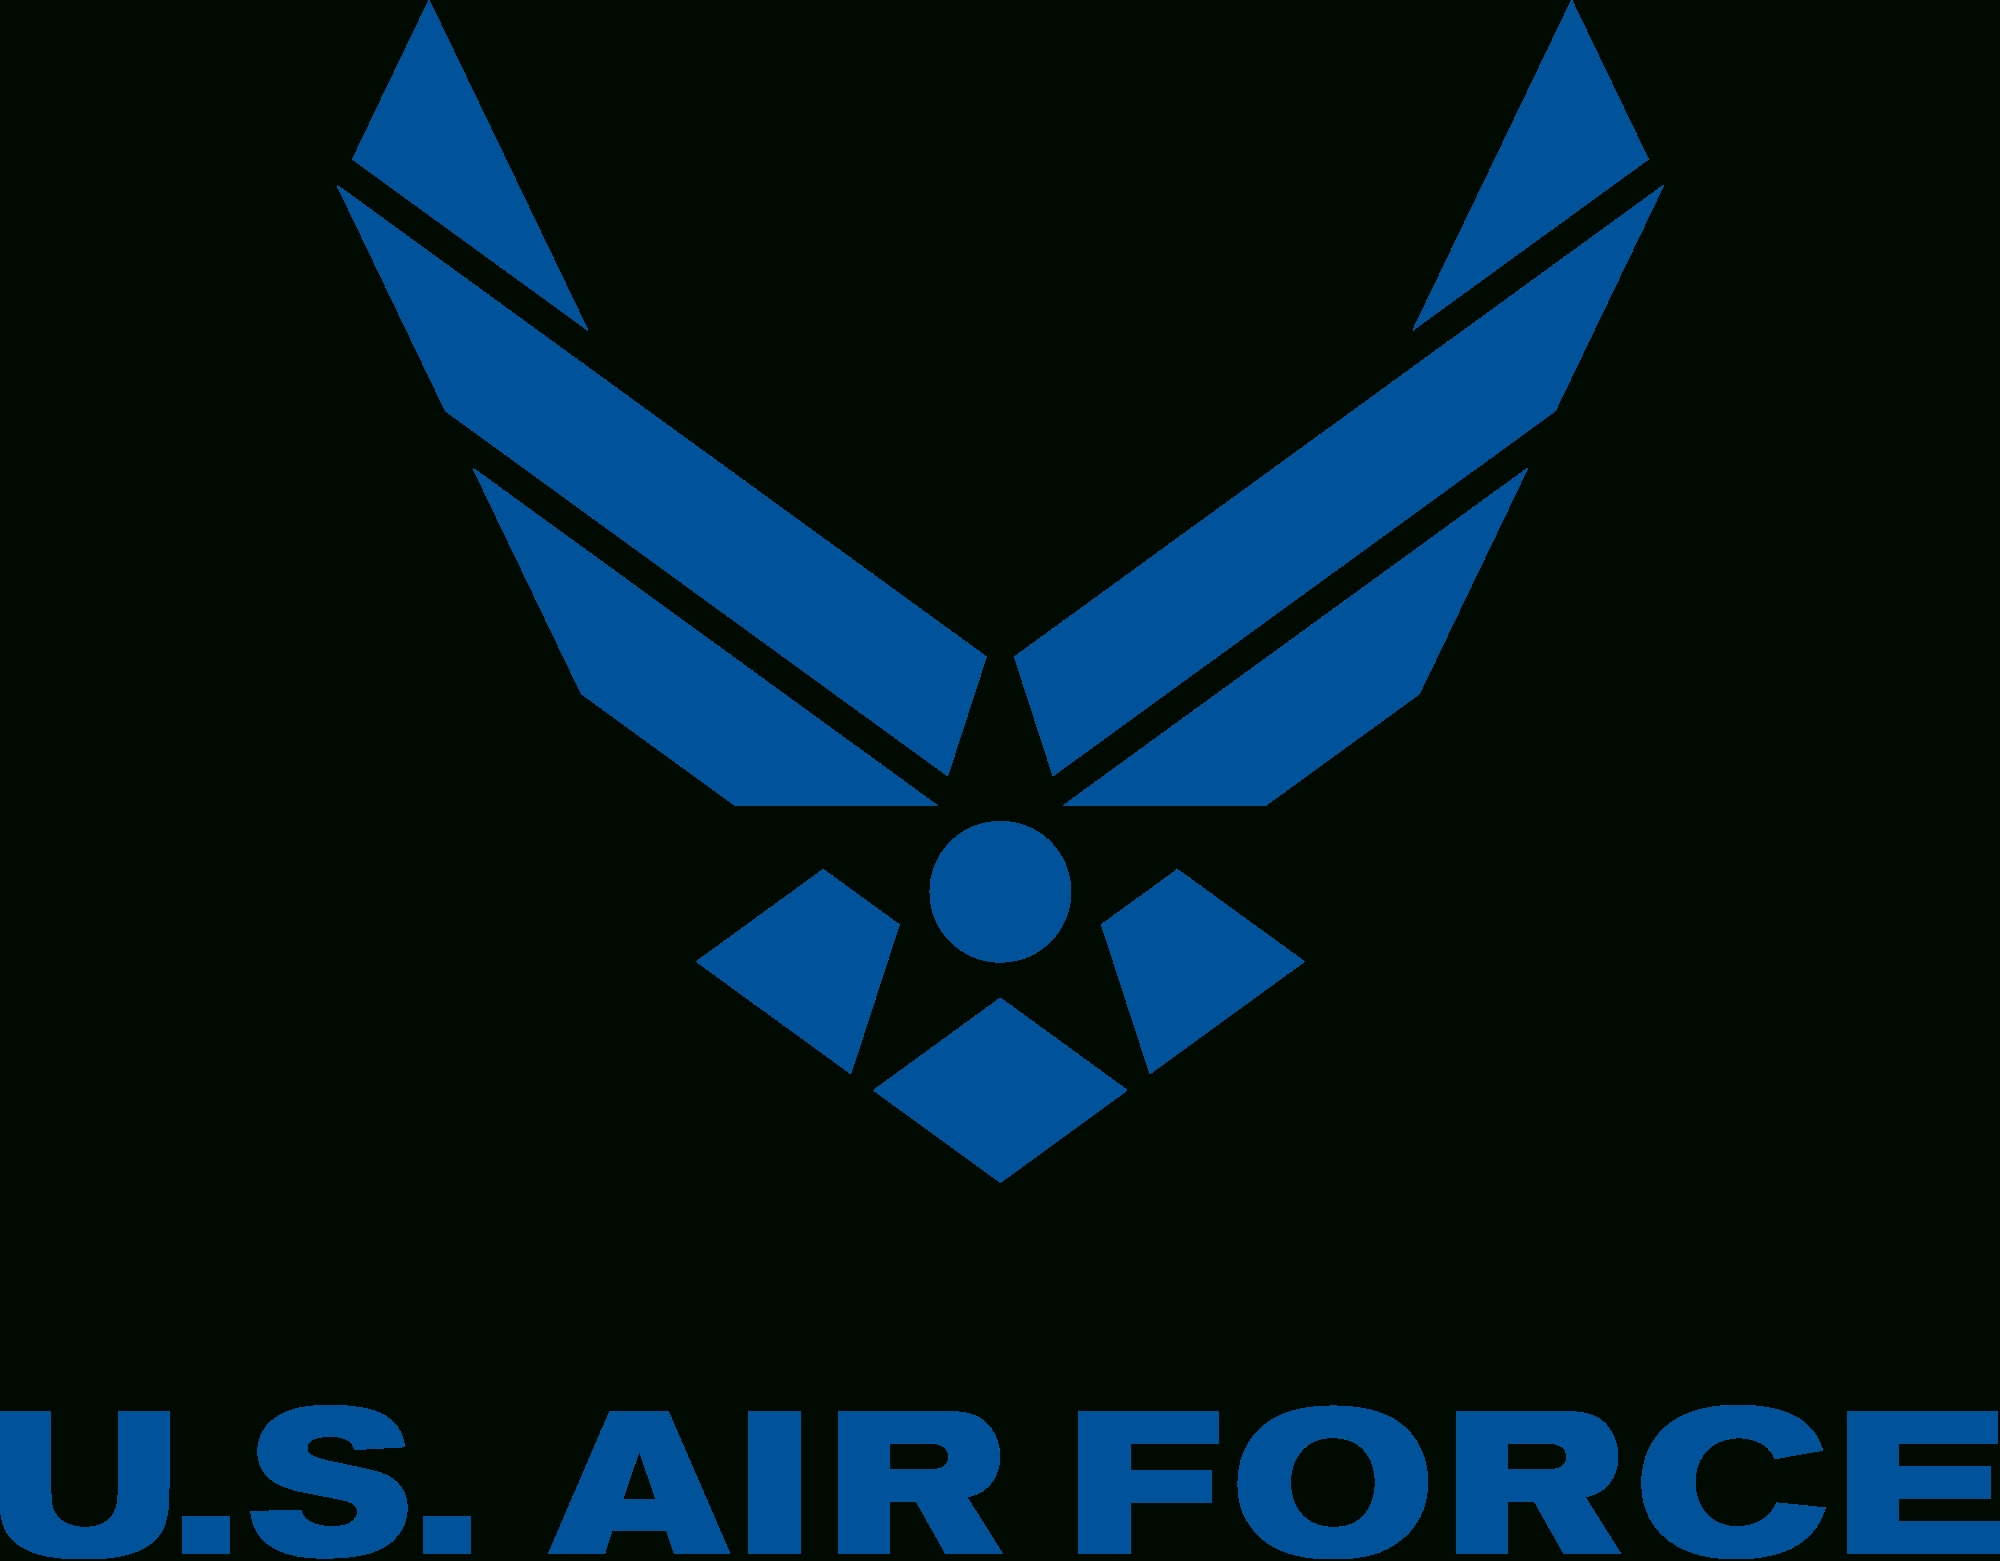 10 New Air Force Logo Image FULL HD 1920×1080 For PC Background